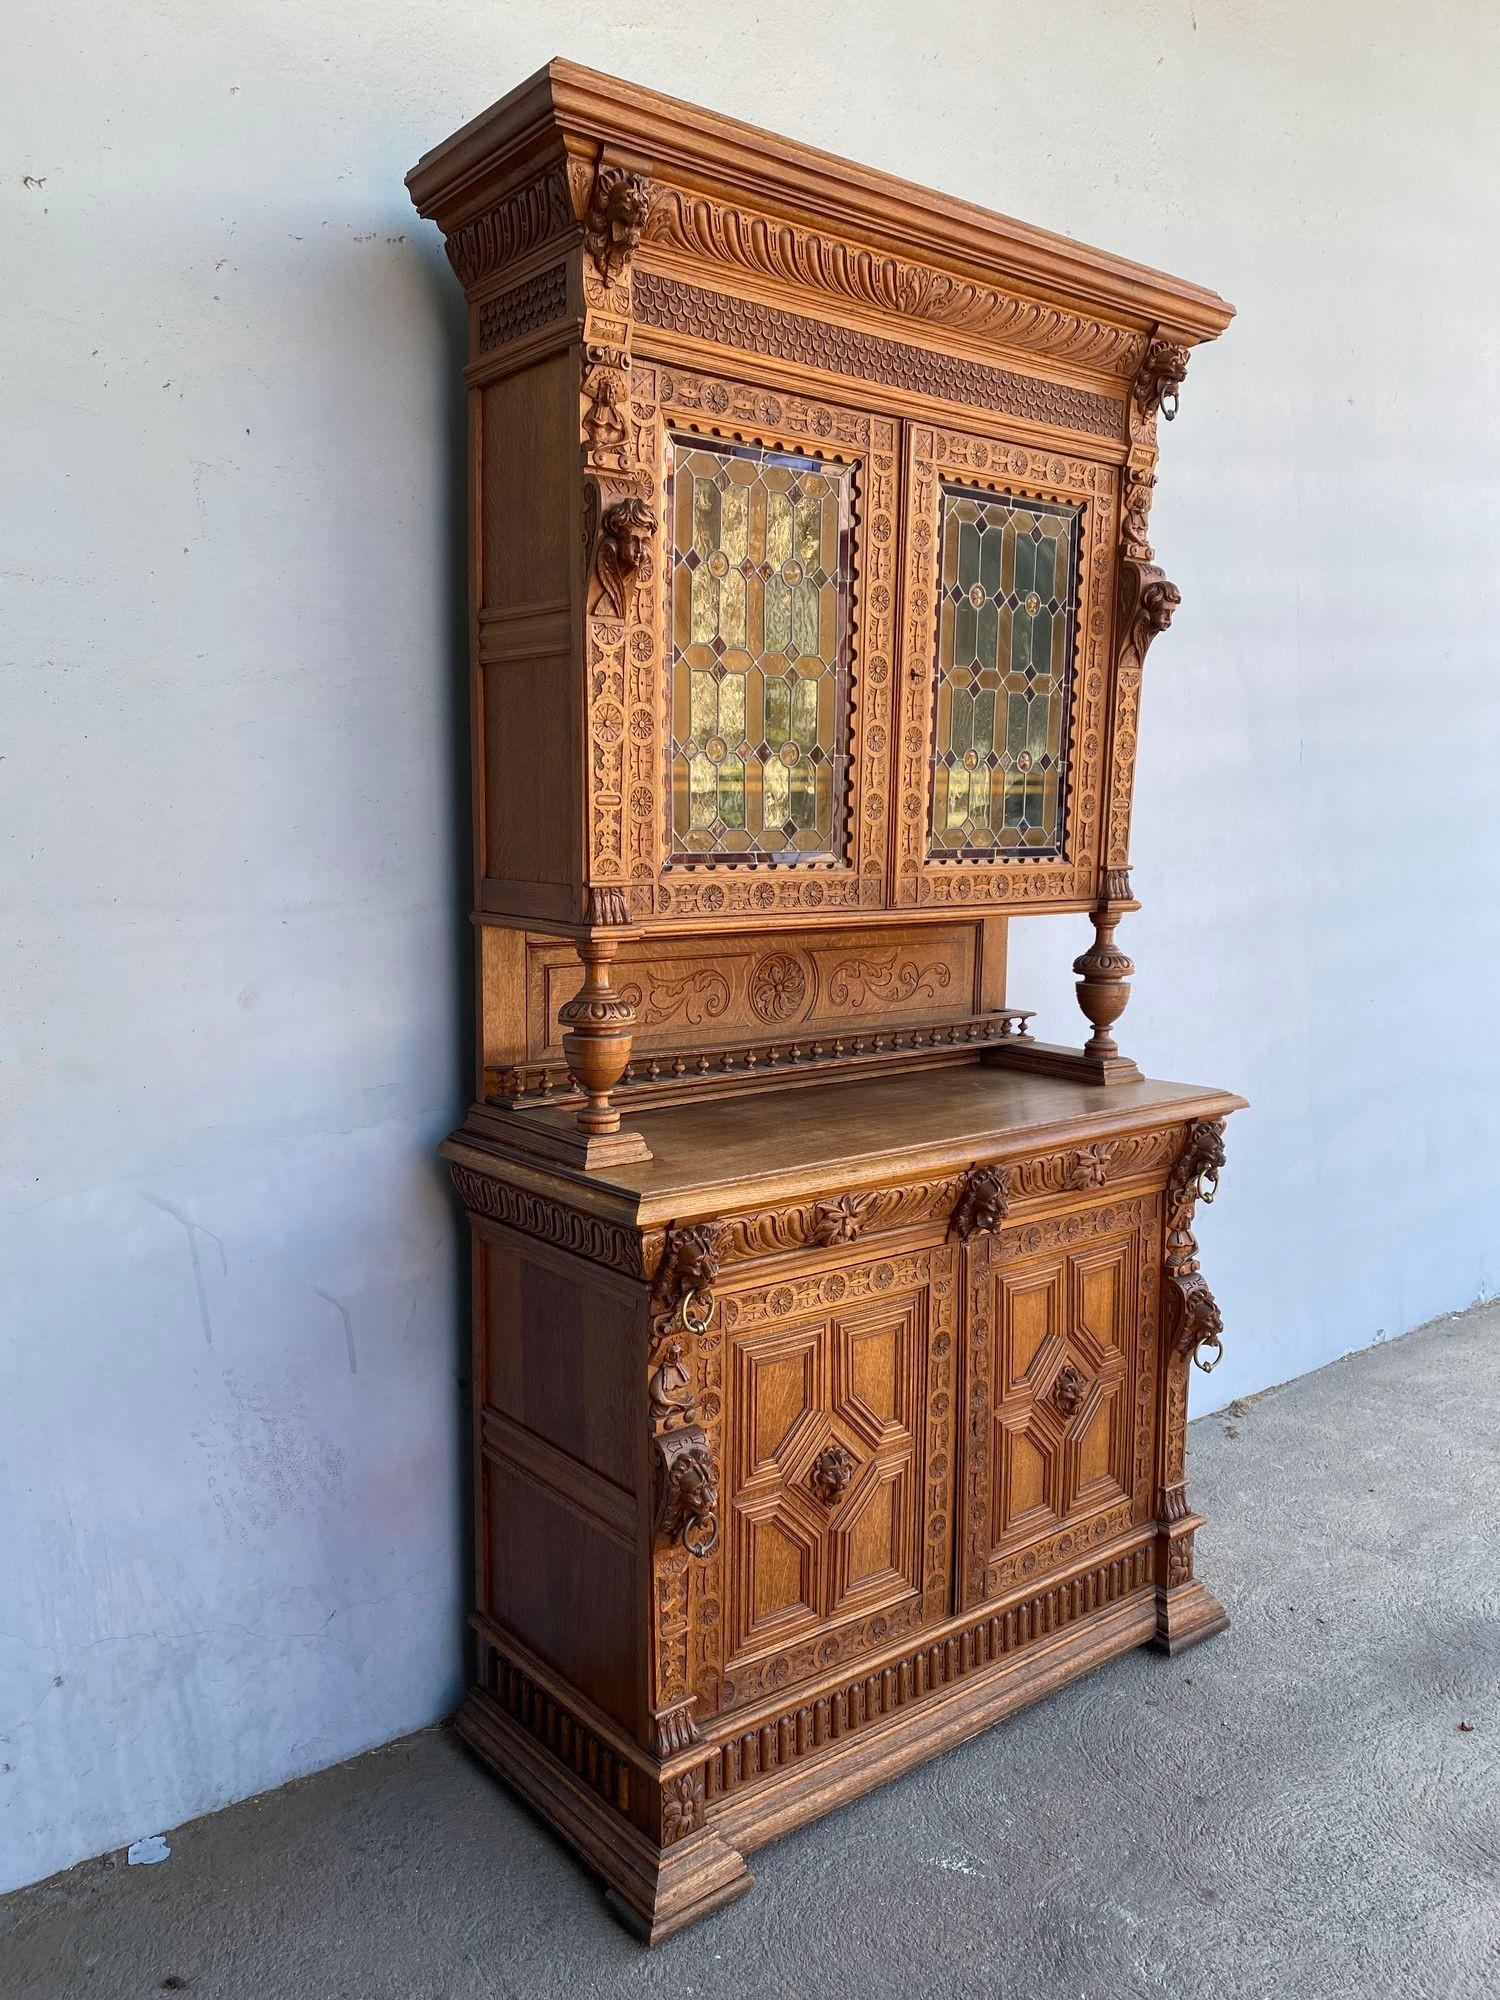 Late 19th century French Renaissance Buffet featuring hand-carved Putti angels and lion heads and large 2 staindglass doors on top. This a two-piece unit with 2 stained glass doors and 3 shelf top breakfront hutch on top. The base has two shelves